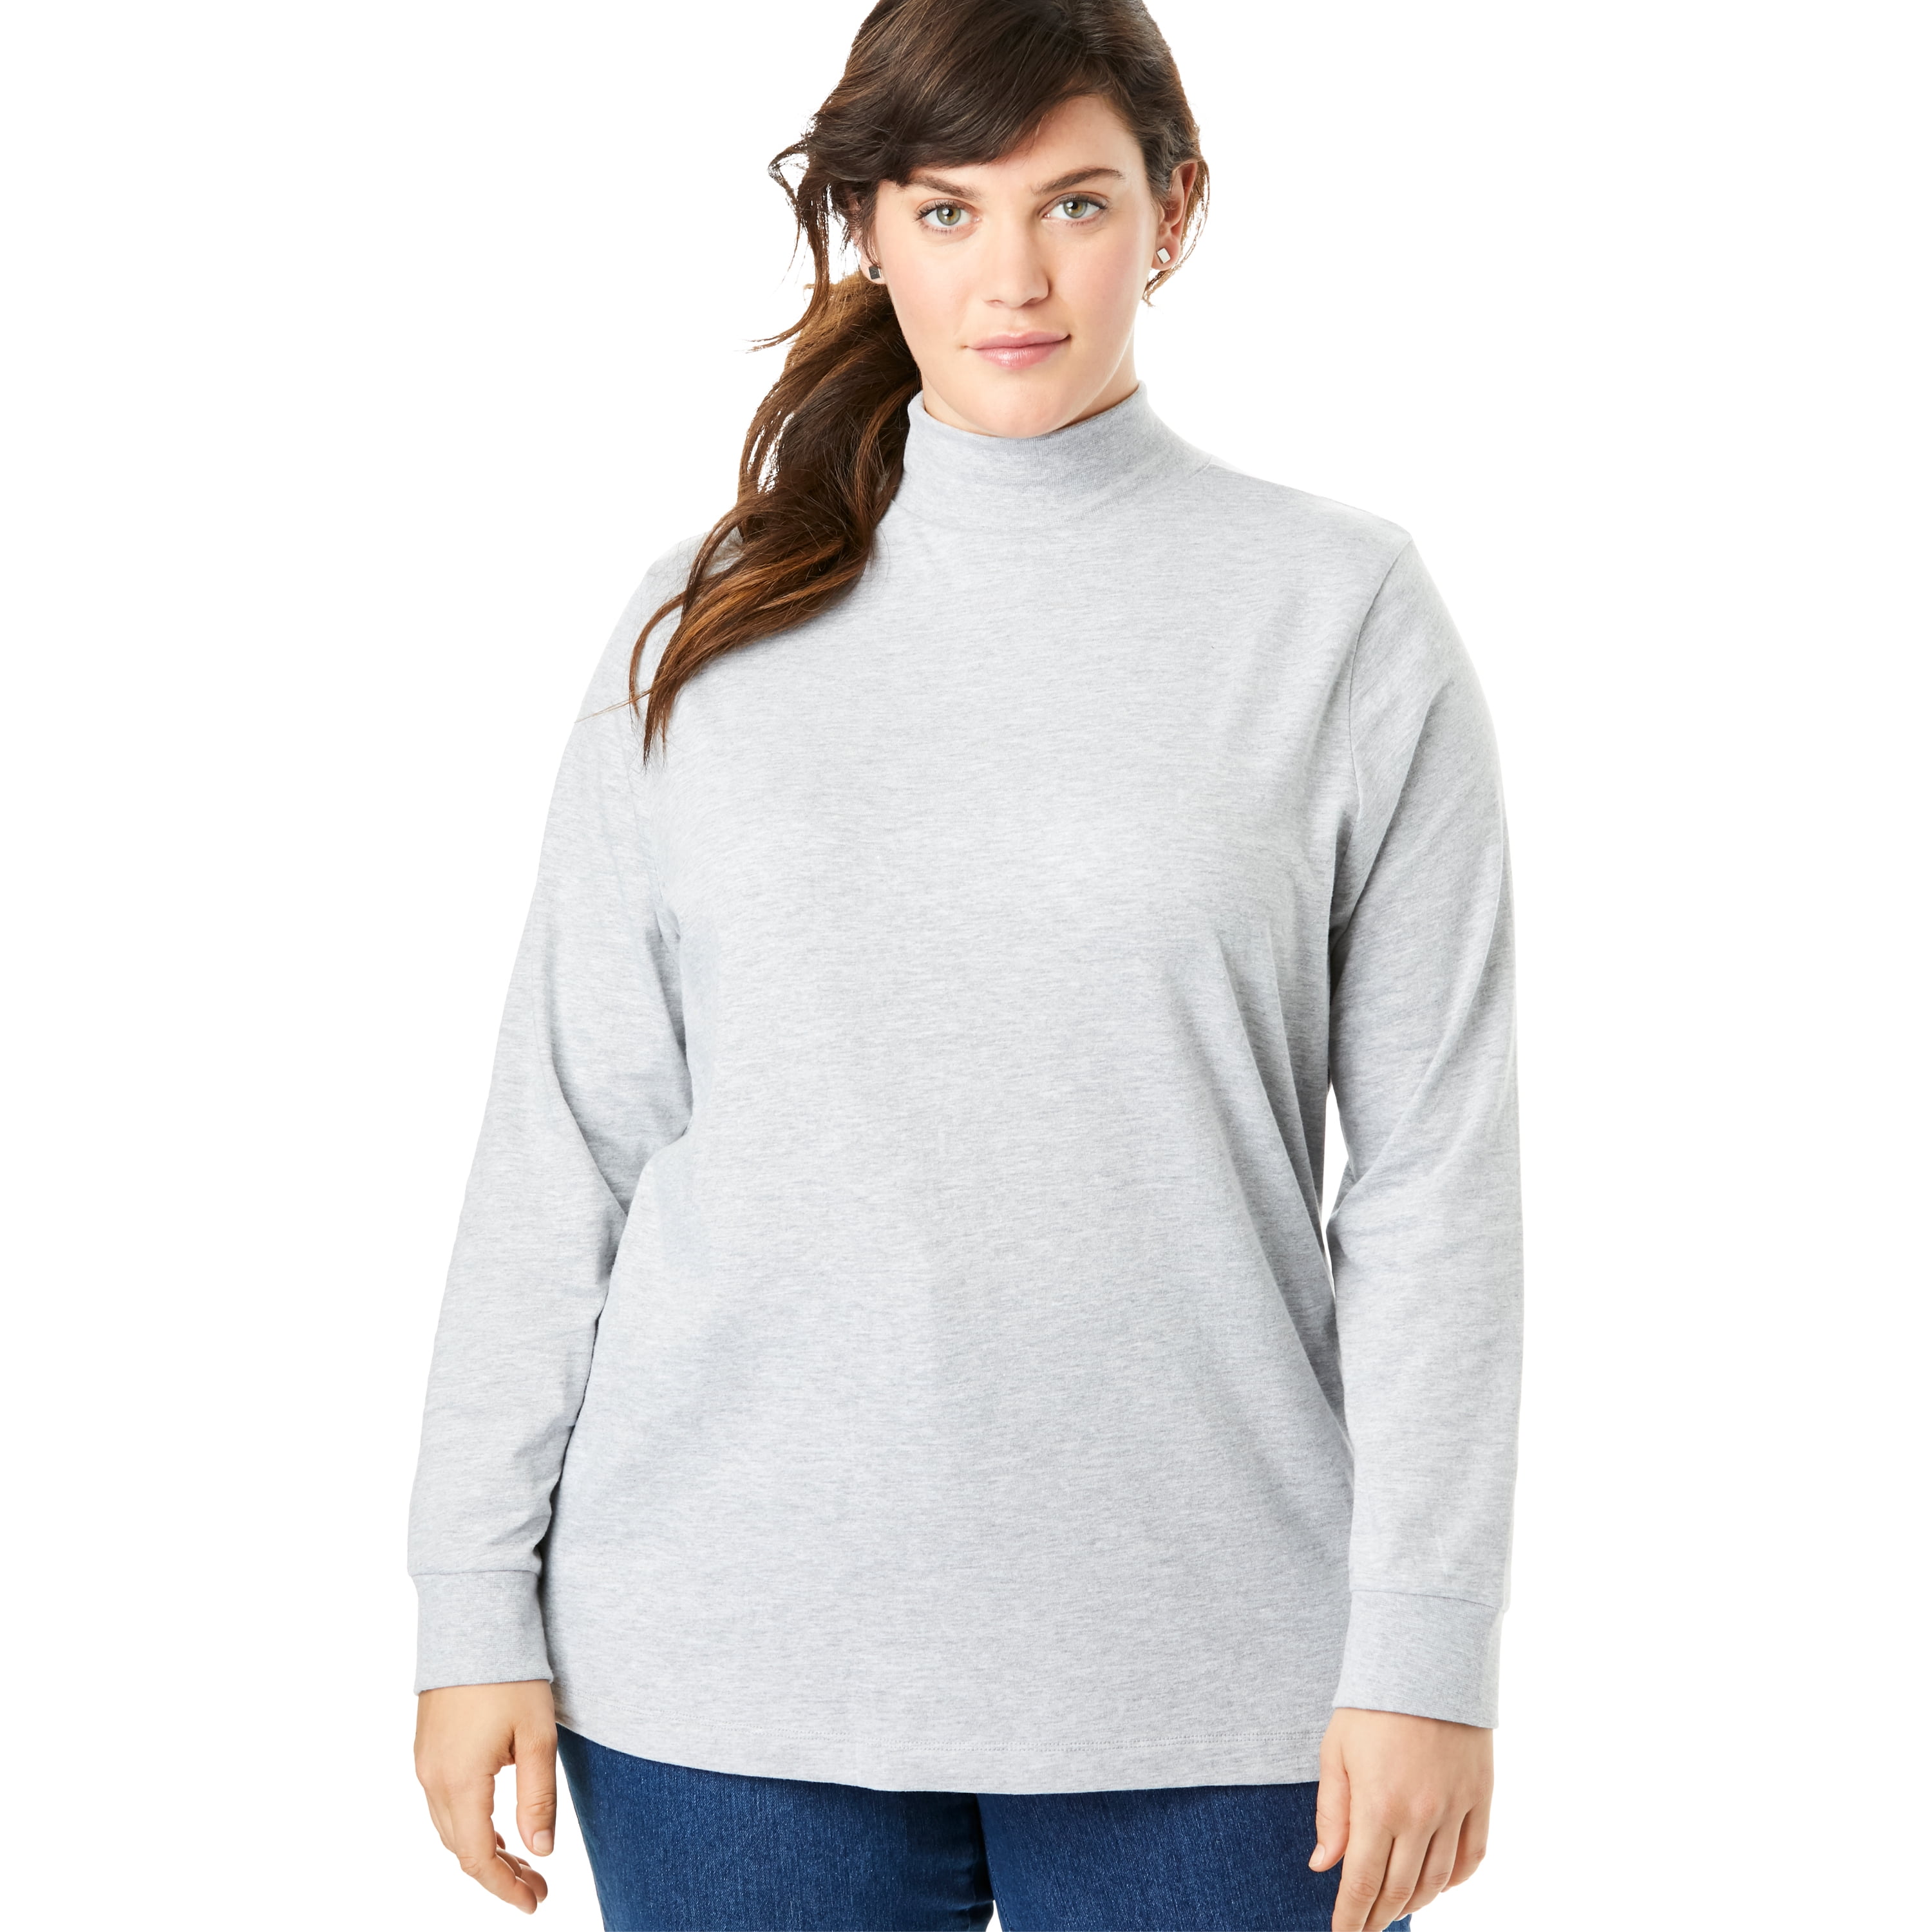 Woman Within Womens Plus Size Petite Perfect Long Sleeve Mock Turtleneck